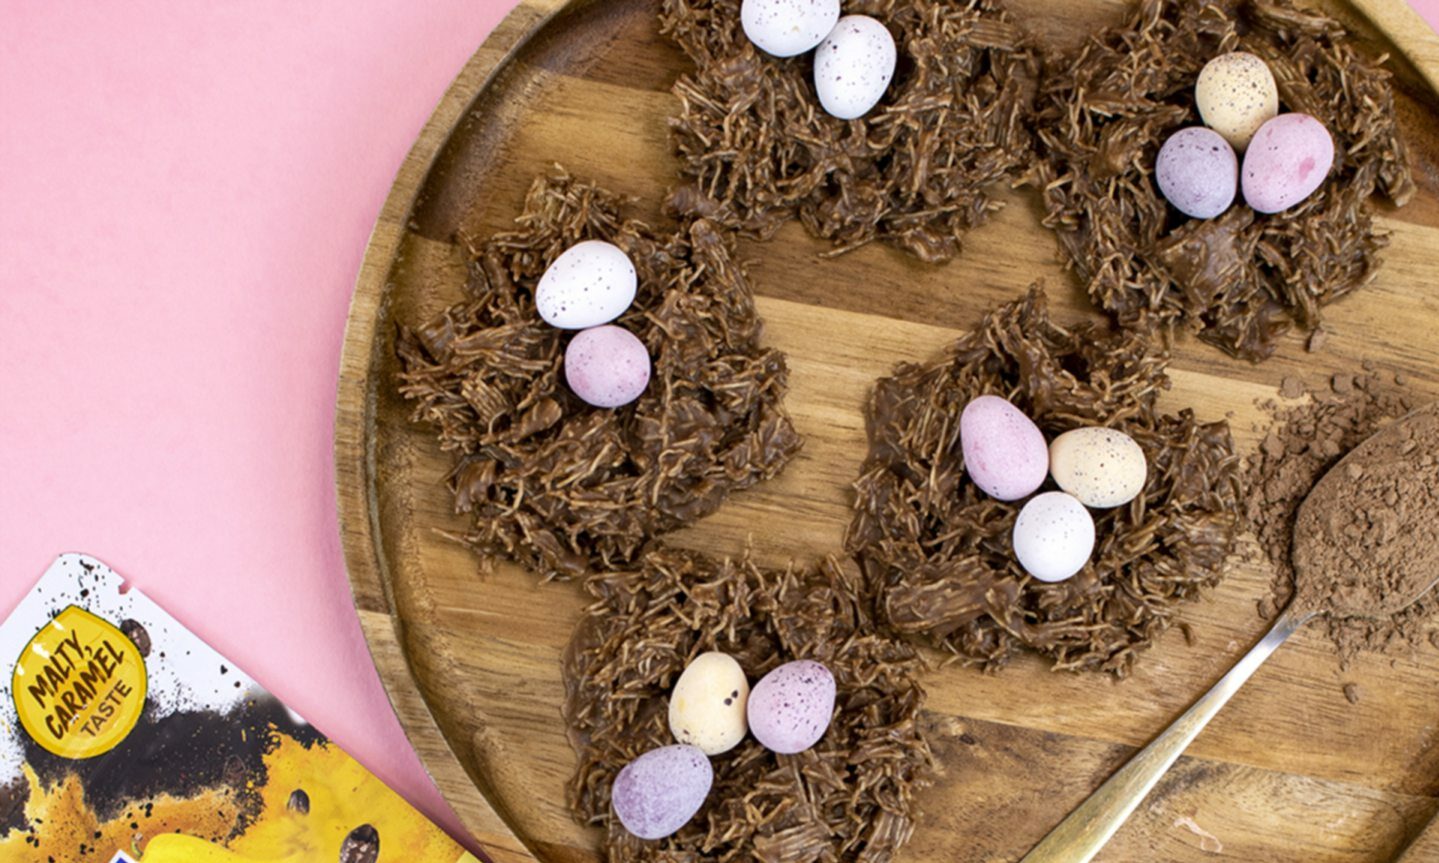 The Easter nests.